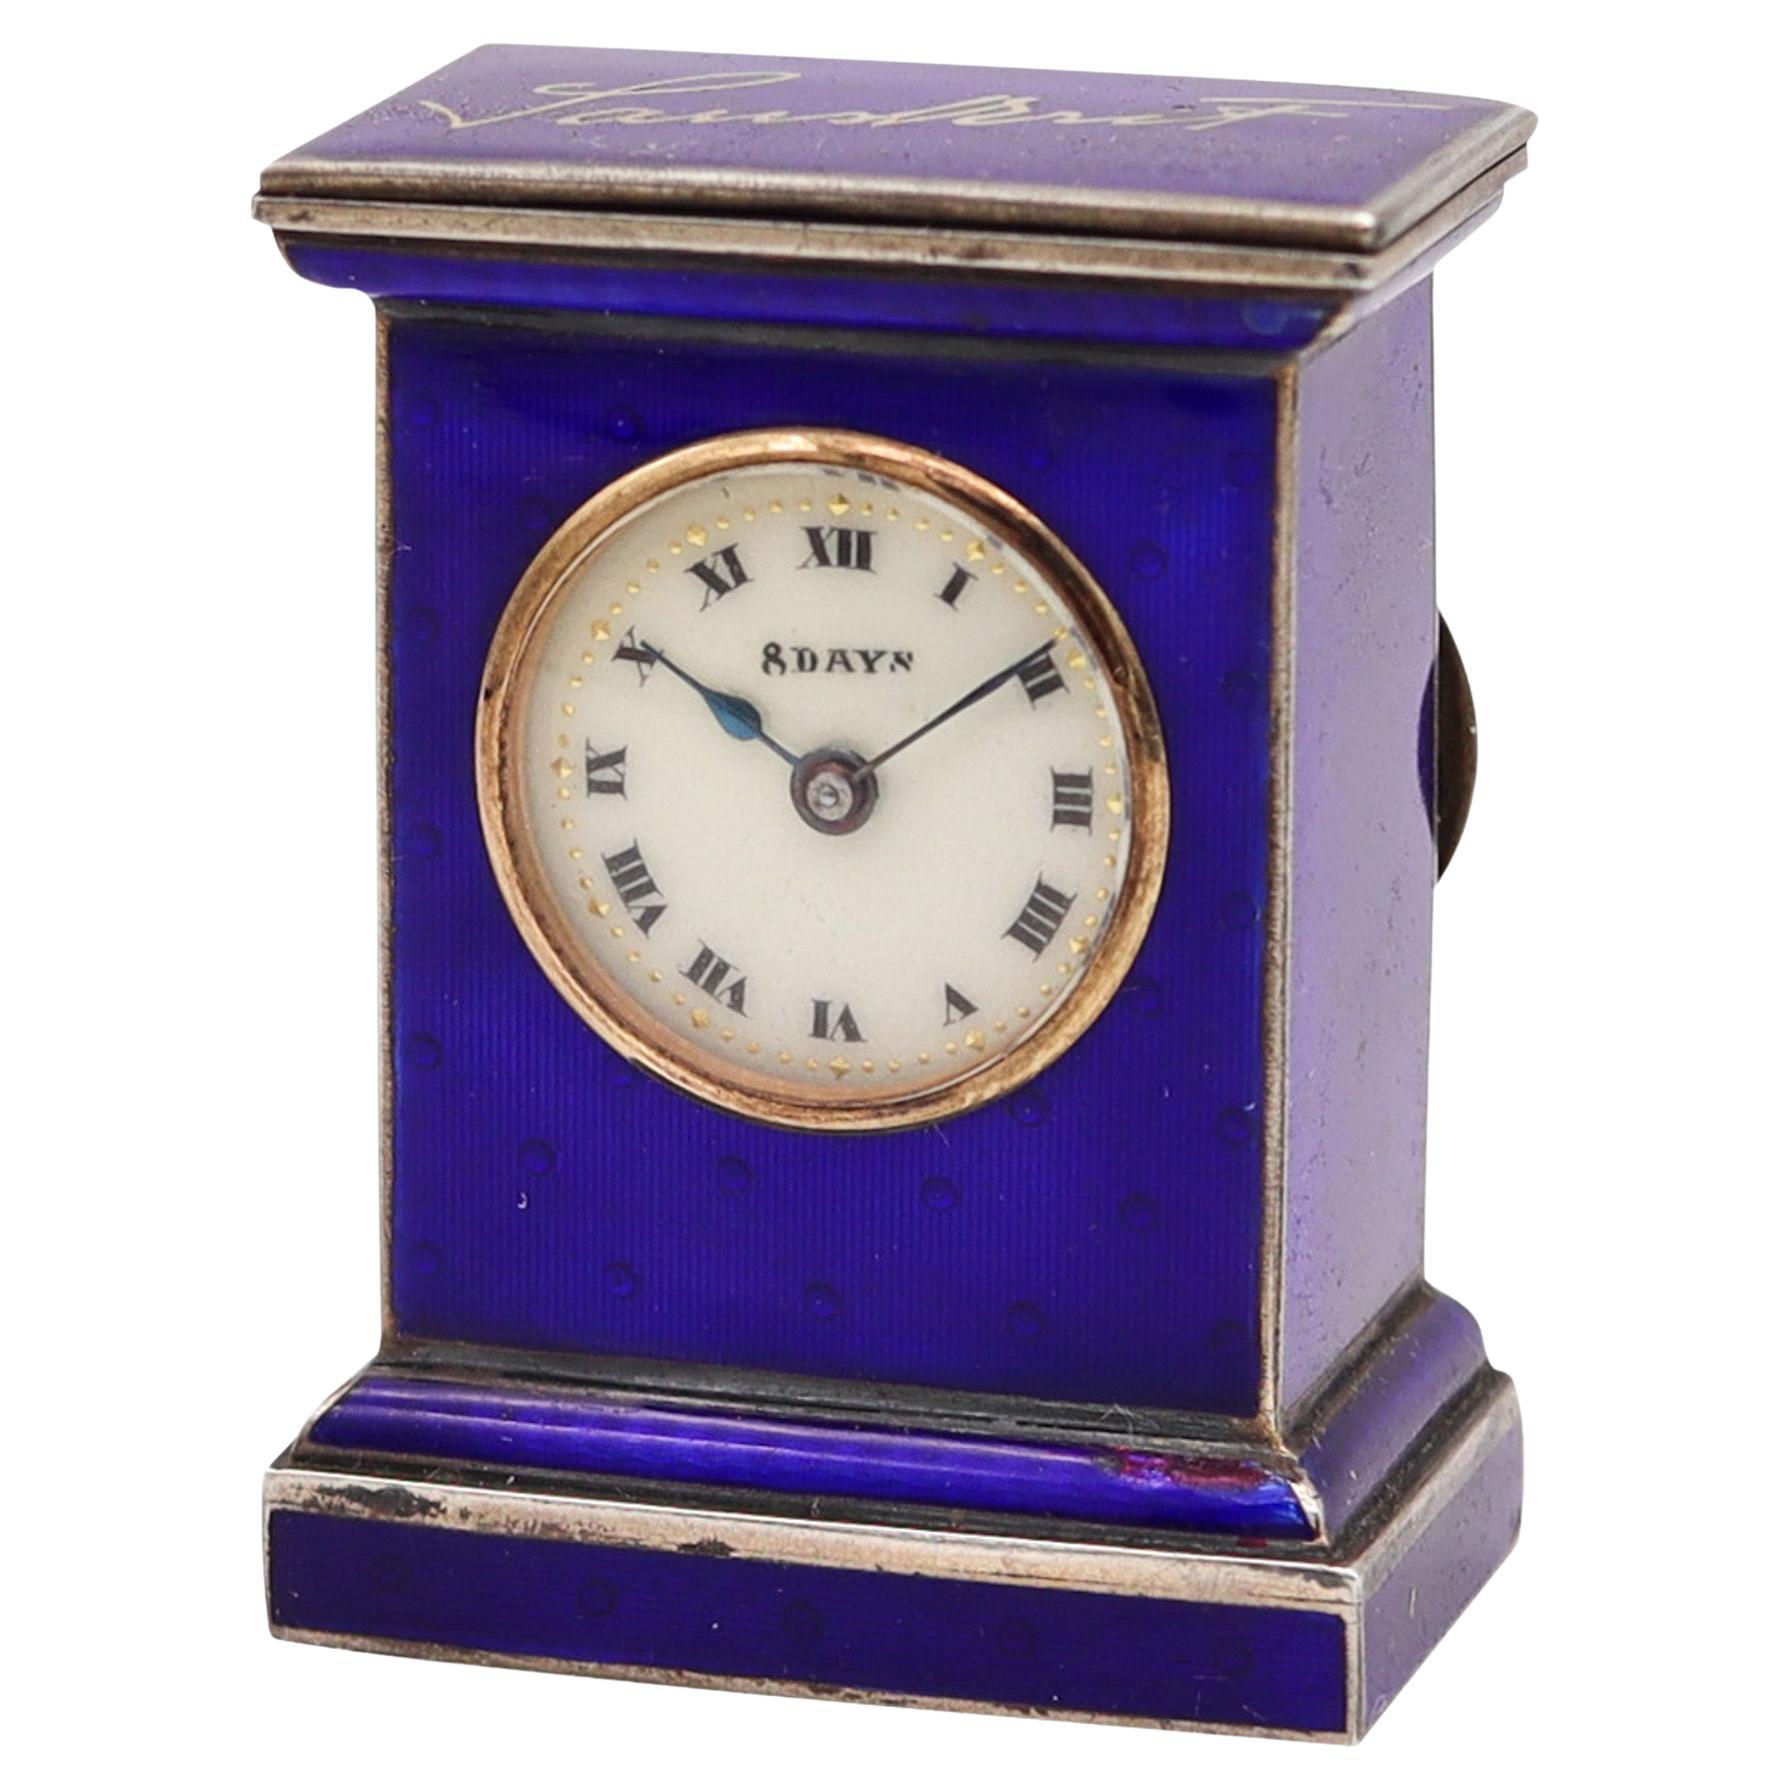 Valme 1920 Miniature Travel Clock With Guilloché Enamel In Sterling With Box For Sale